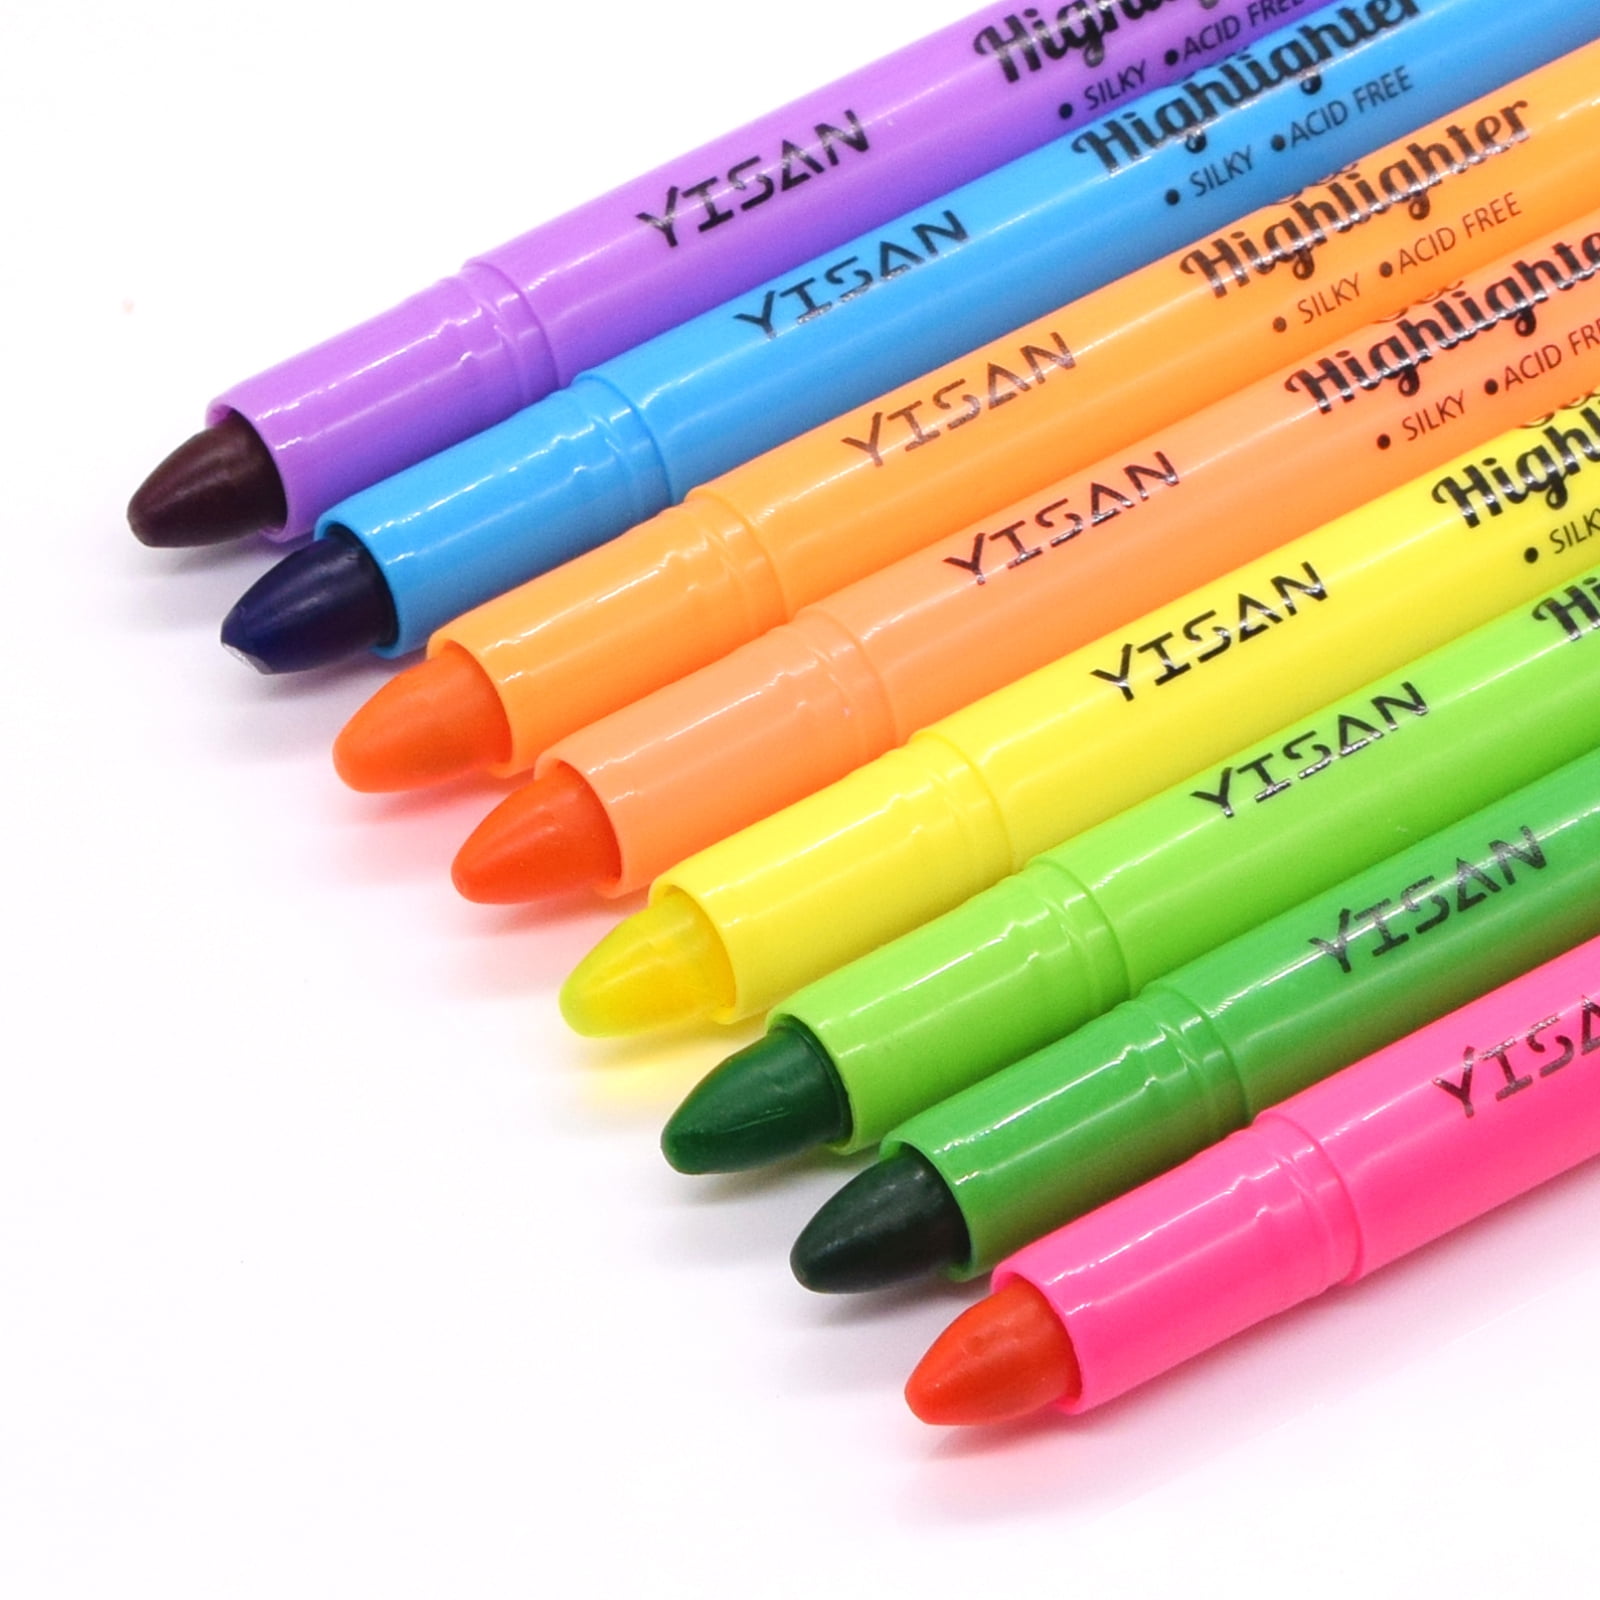 ZEYAR Highlighters, Dual Tips Marker Pen, Chisel and Fine Tips, 6 Macaron  Colors, Water Based, Assorted Colors, Quick Dry (6 Macaron Colors) 